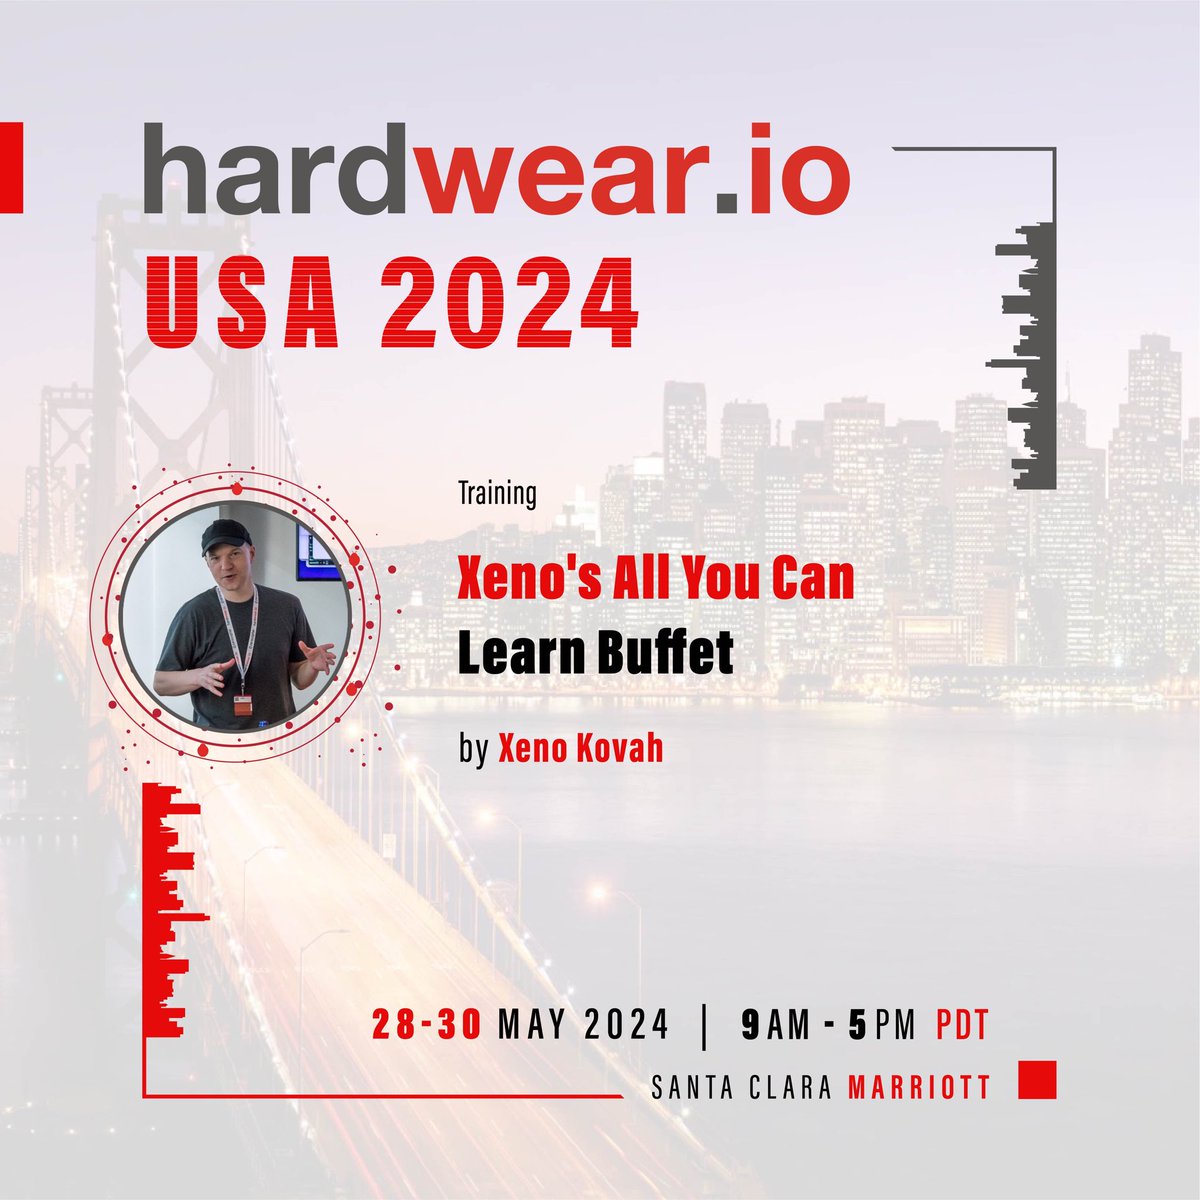 In my upcoming @hardwear_io training, you get to pick whether you want to learn about x86-64 assembly, x86-64 OS internals, Intel firmware attack & defense, C/C++ source code vulnerability hunting, or RISC-V assembly! A true feast for the curious! hardwear.io/usa-2024/train…